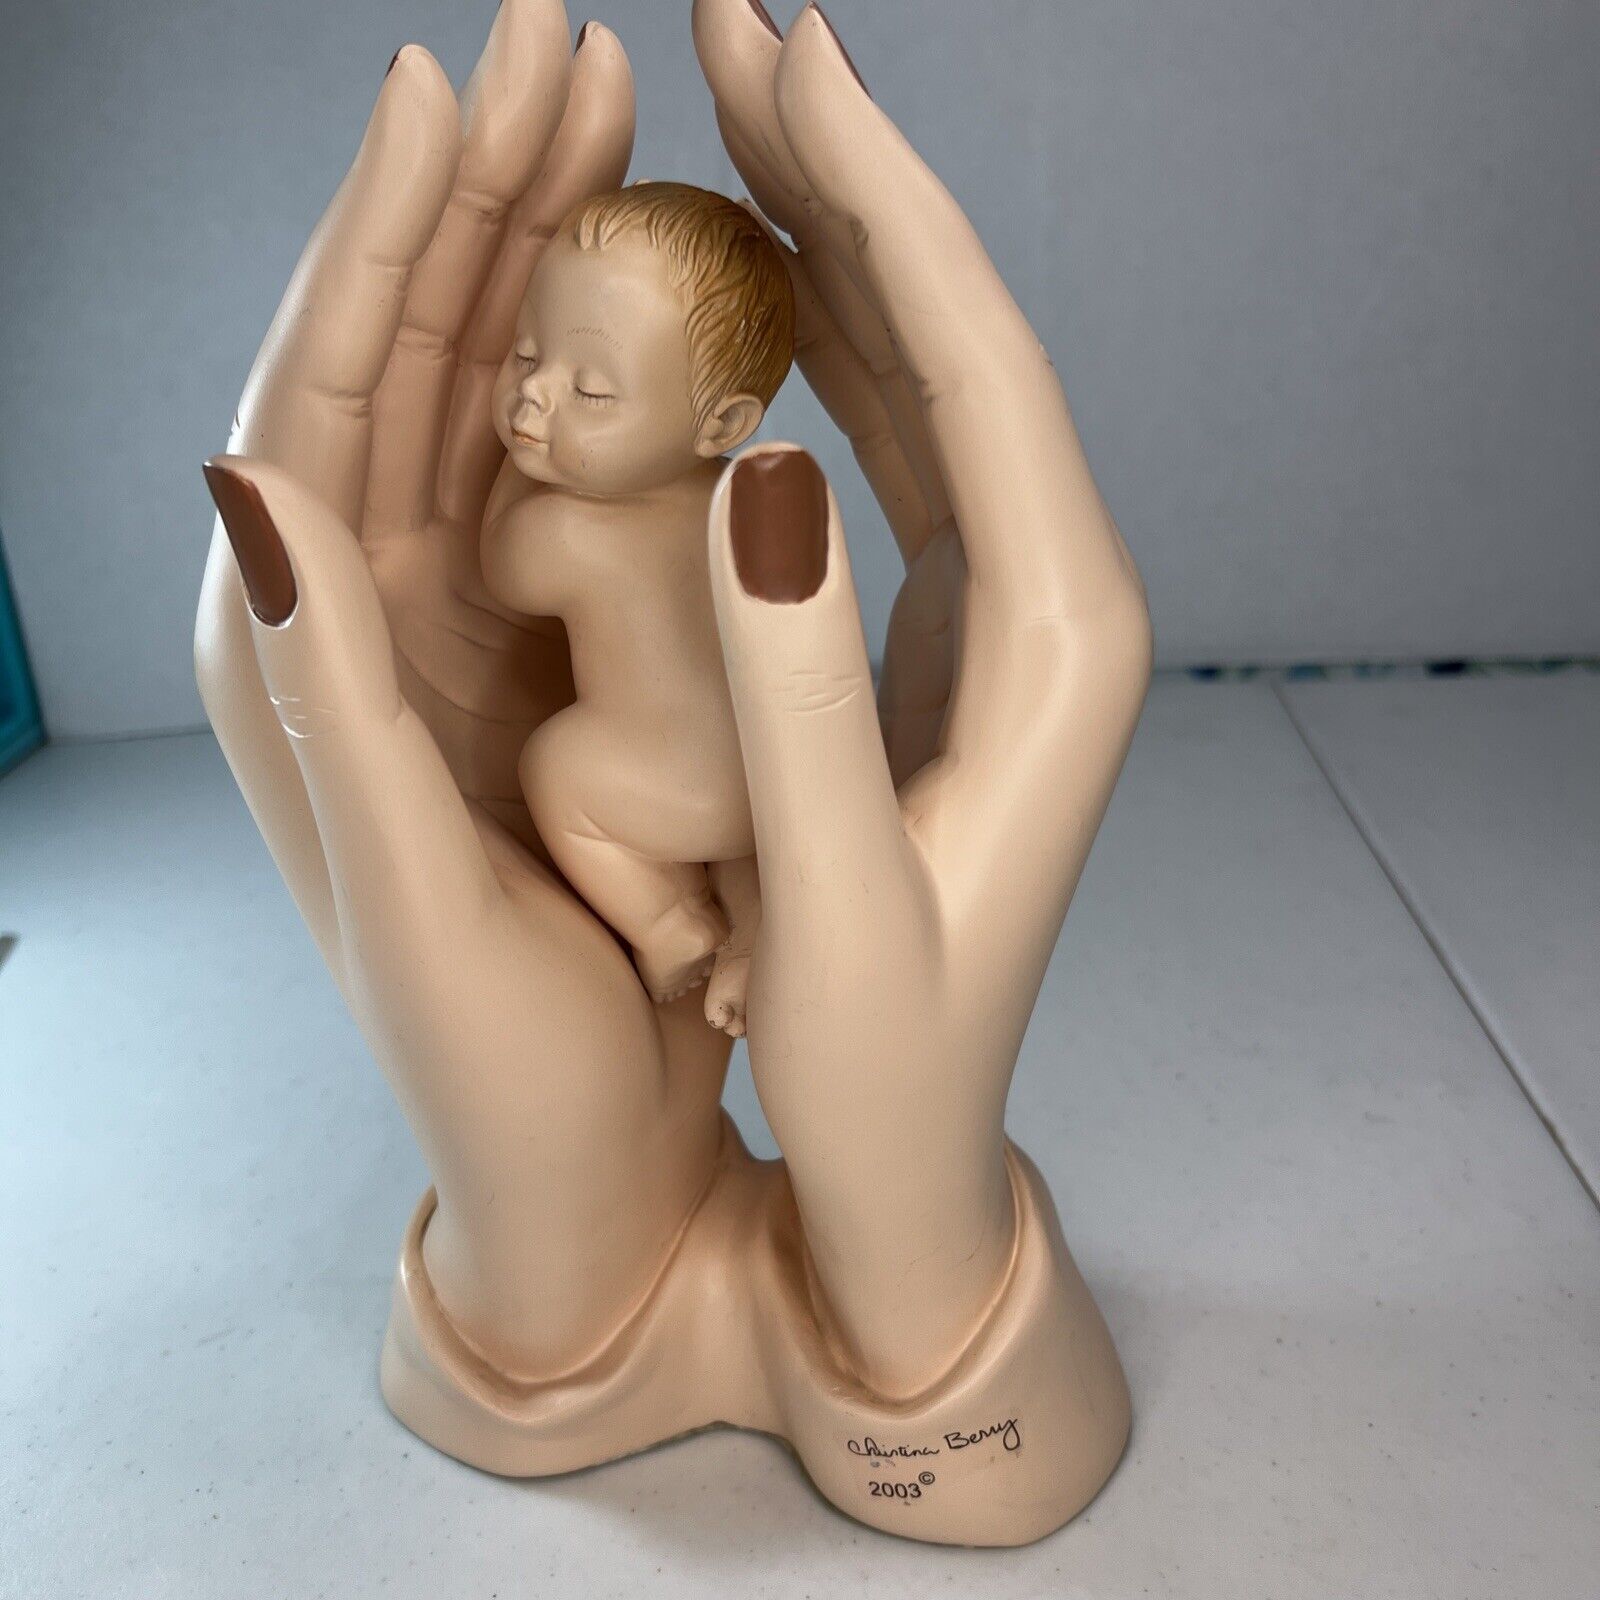 Vintage Mothers Hands Holding Baby Infant Christina Berry 2003 Figurine Problufe